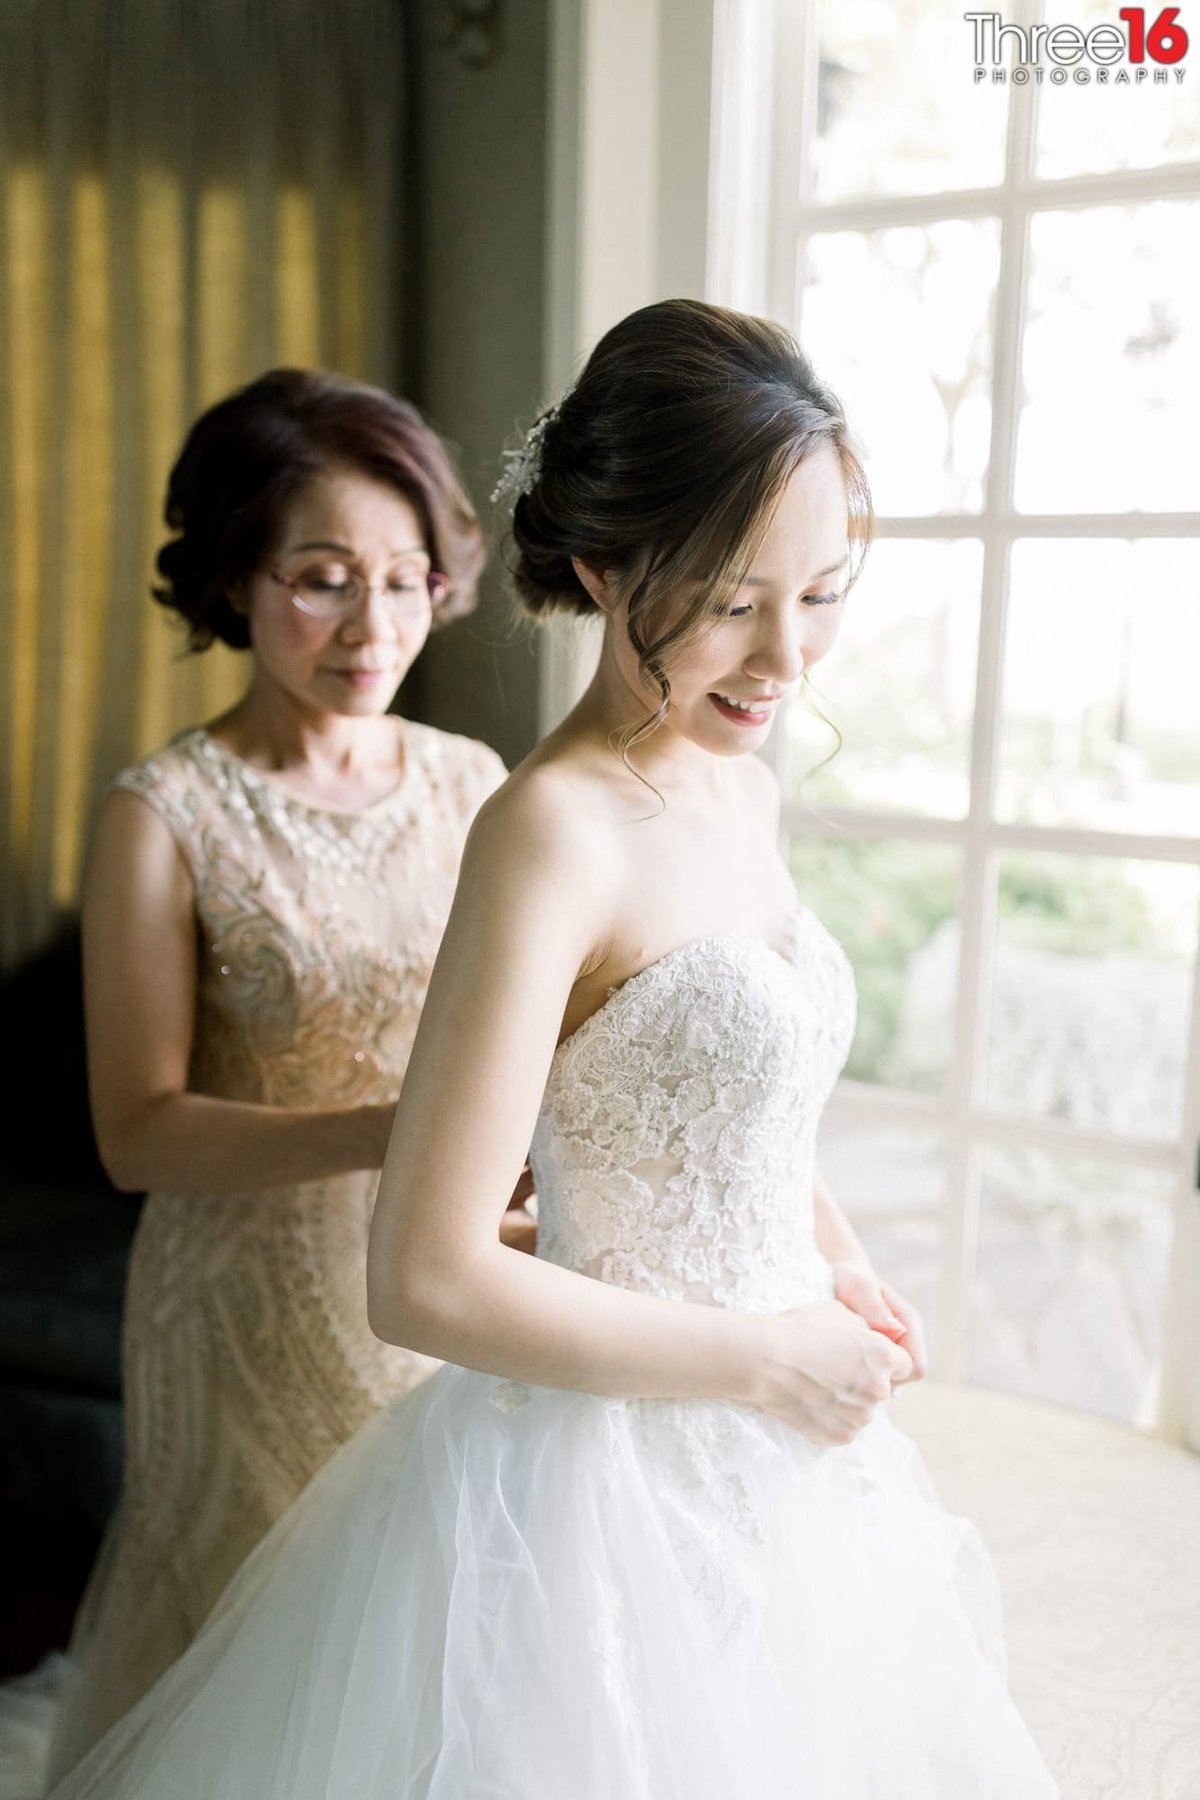 Mother of the Bride buttons her daughter's wedding dress